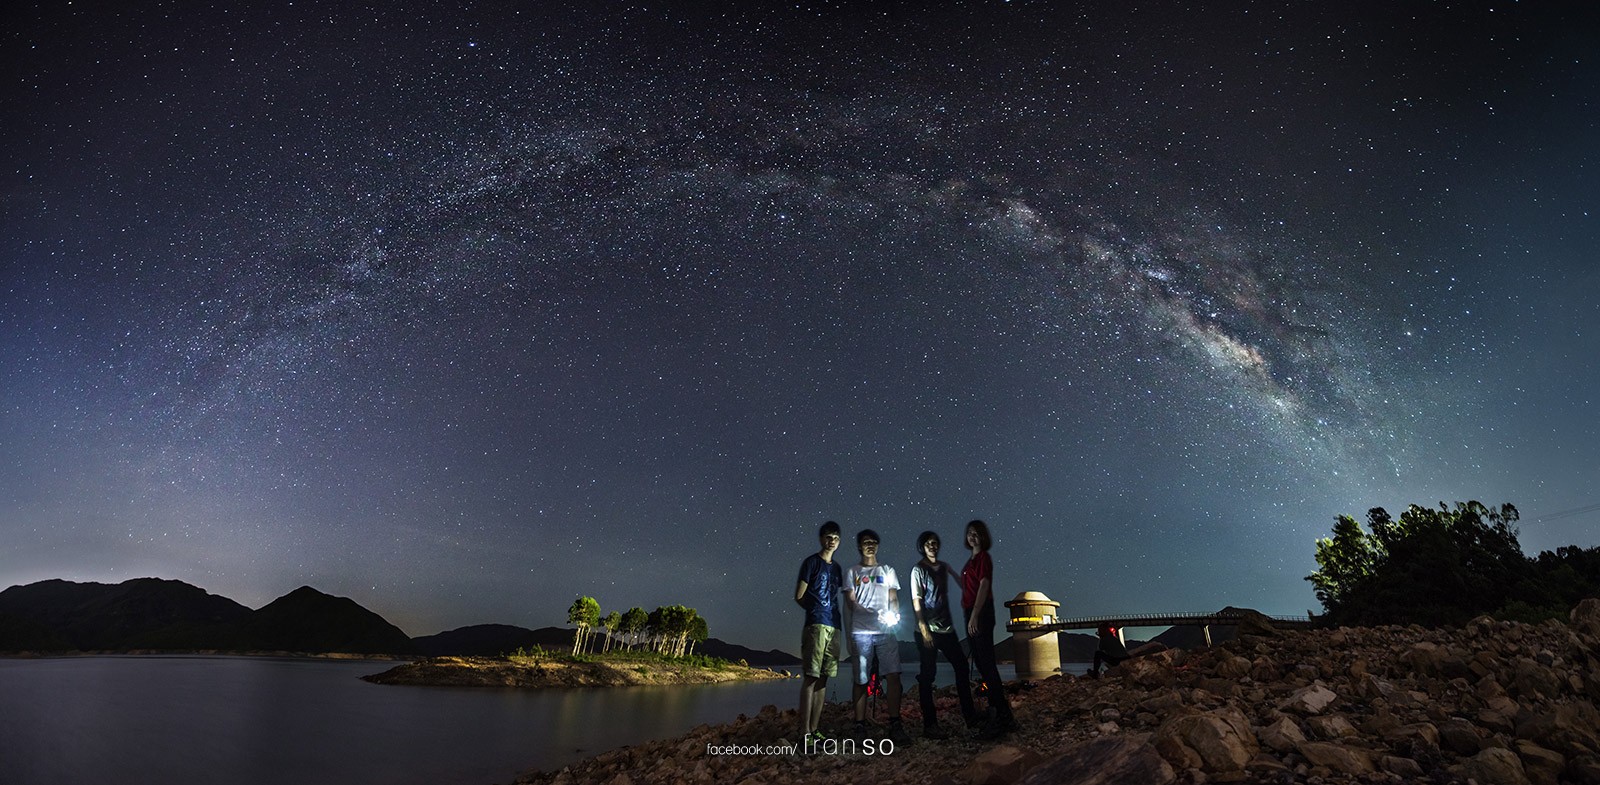 Starscape and Milkyway | Hong Kong | The Arch of the Milkyway  | West Dam of High Island Reservoir